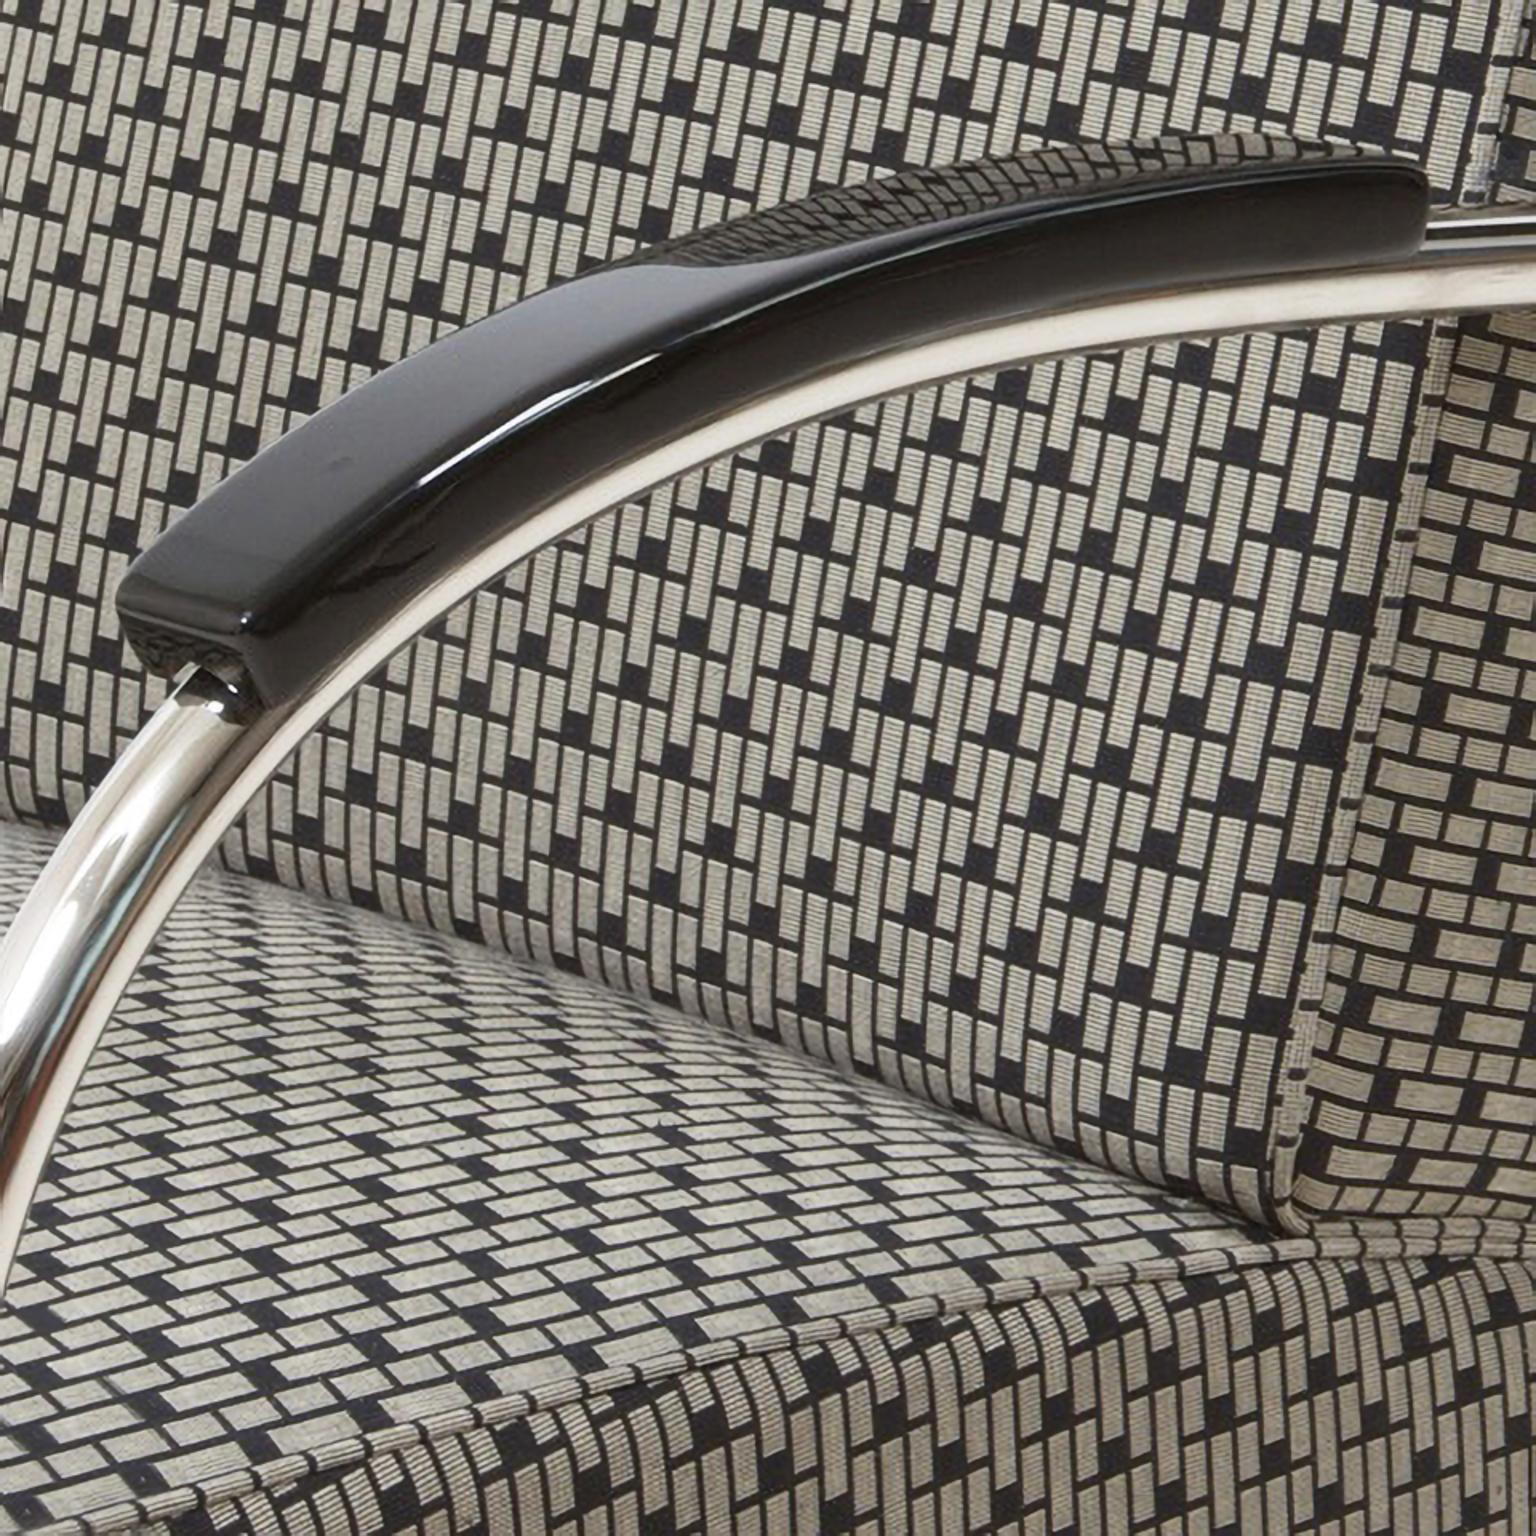 Plated Bespoke Modernist Tubular Steel Armchair, Fabric/ Leather Upholstery c. 1930 For Sale